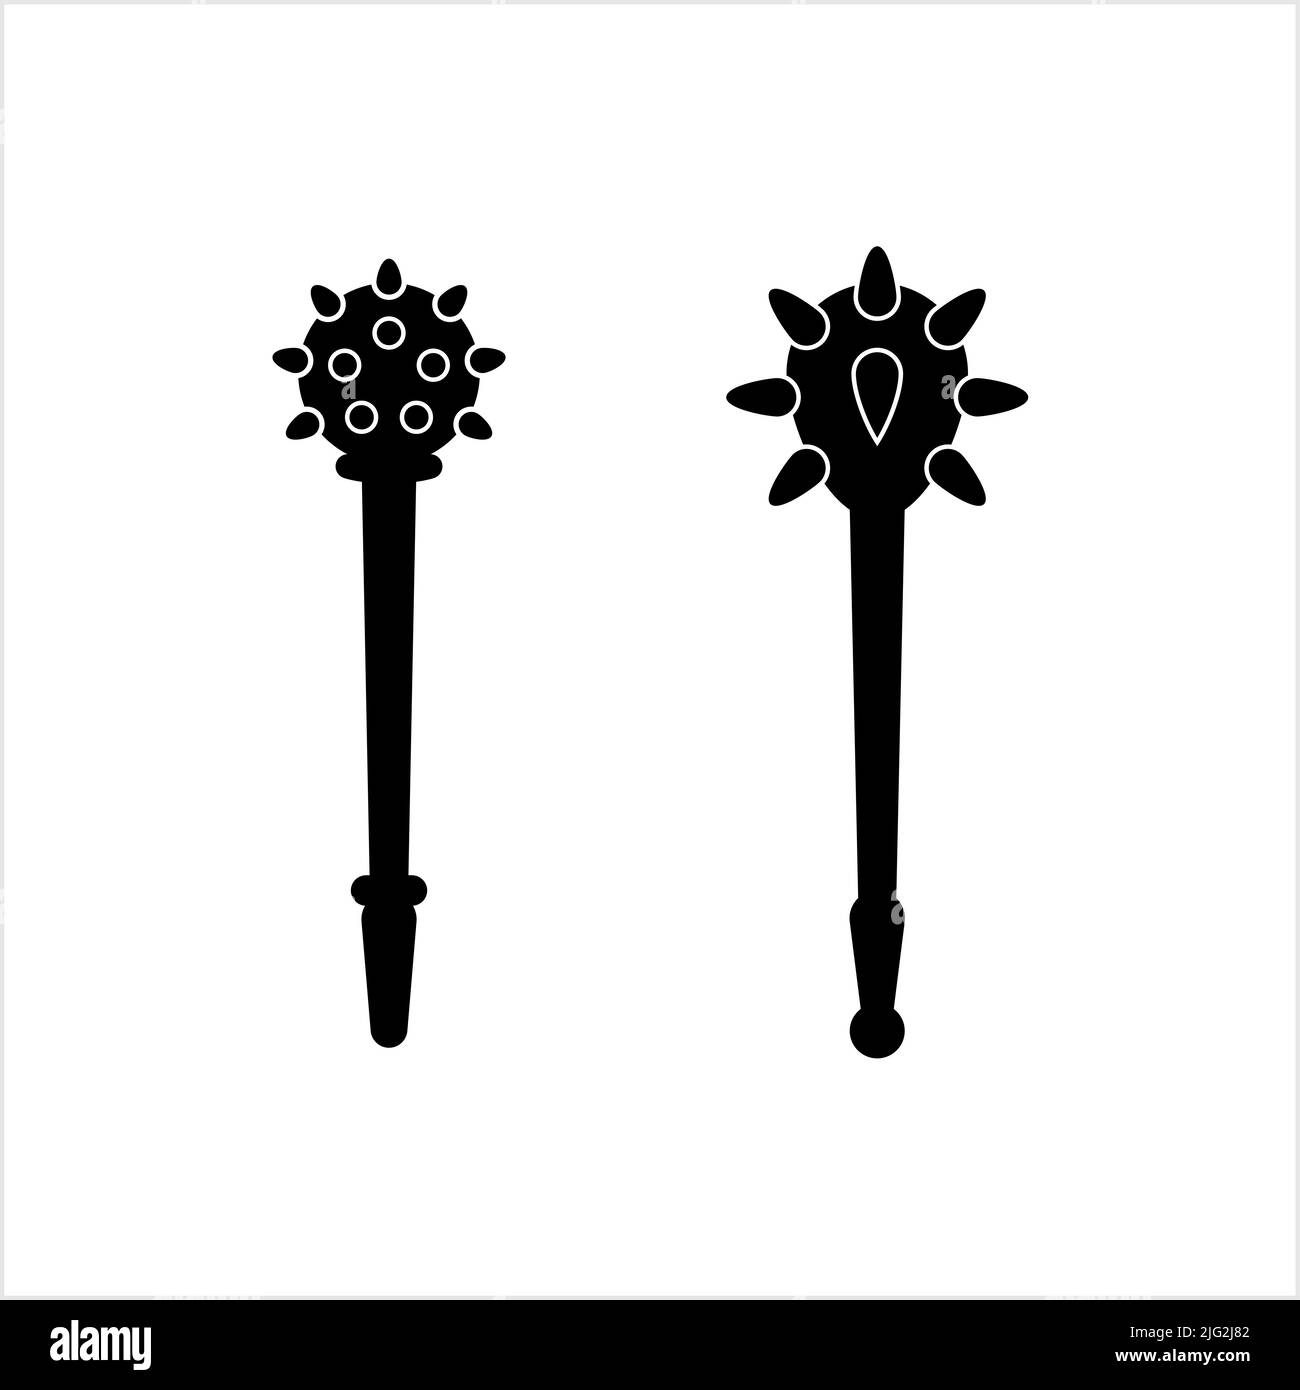 Mace Icon, Blunt Weapon Icon, Spiked, Flanged Metal Head Stick Vector Art Illustration Stock Vector